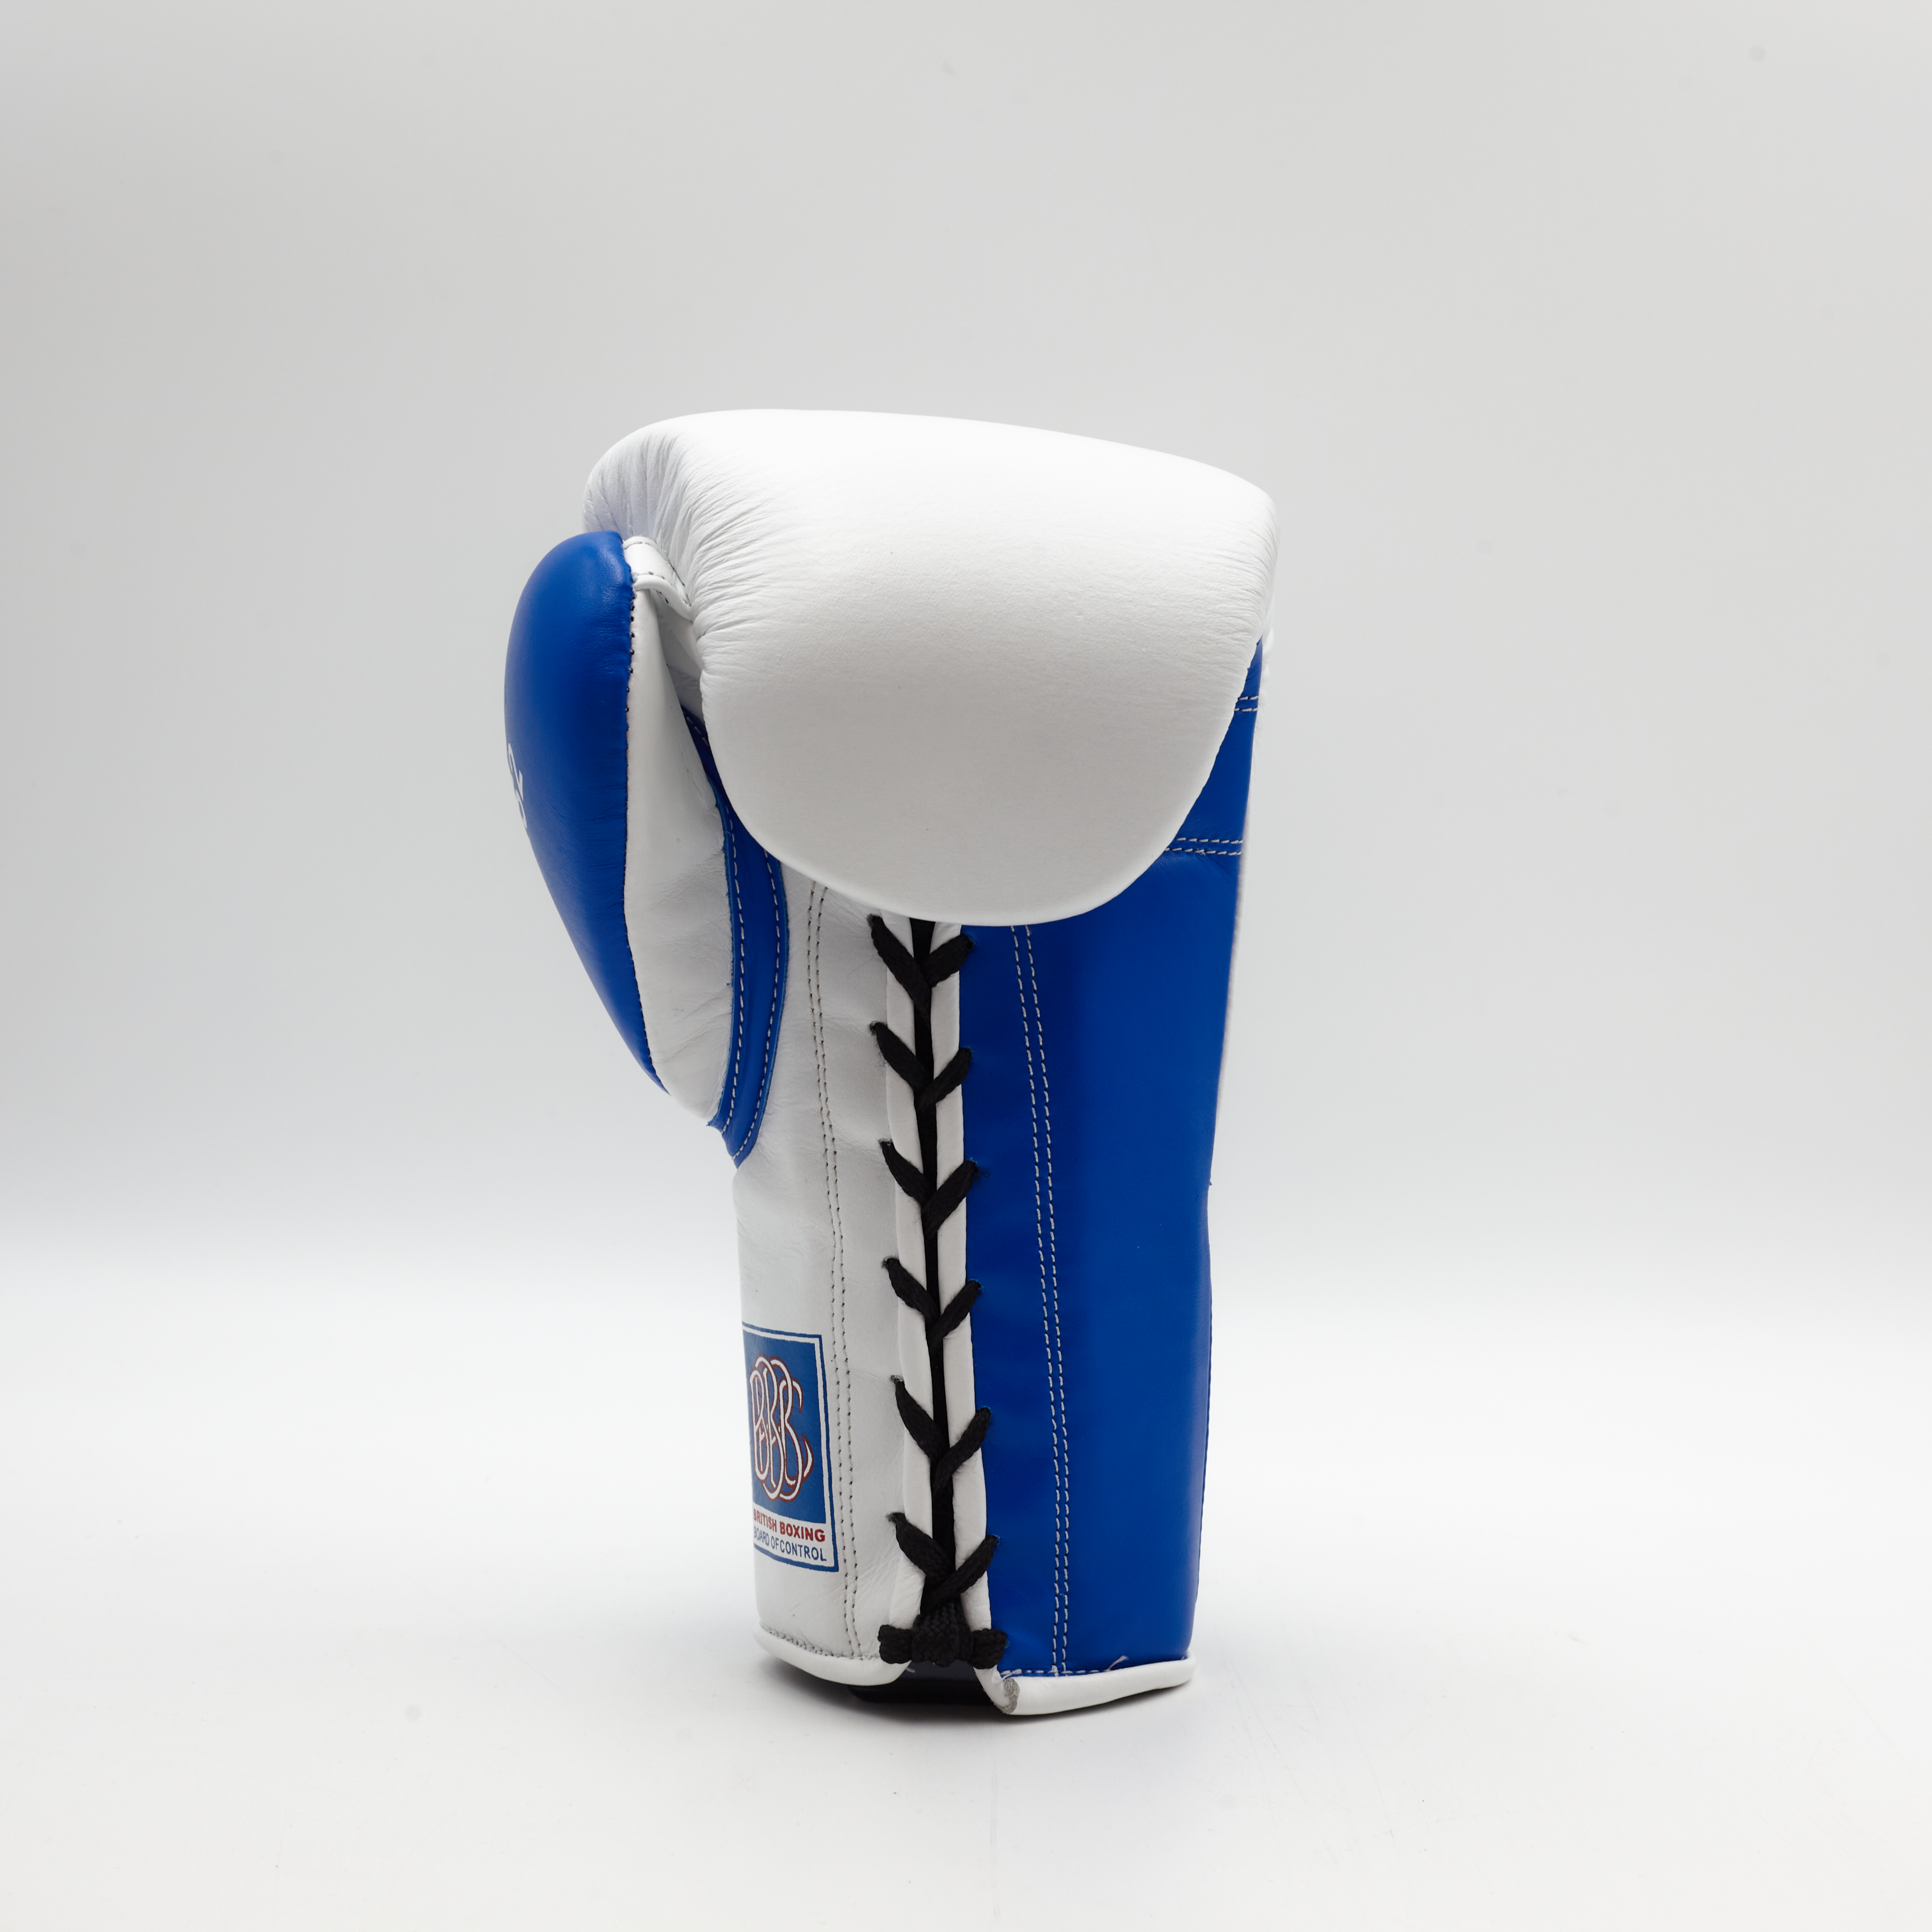 Ringside Boxing UK Pro Contest RS2 Boxing Gloves White / Blue Contest Gloves 